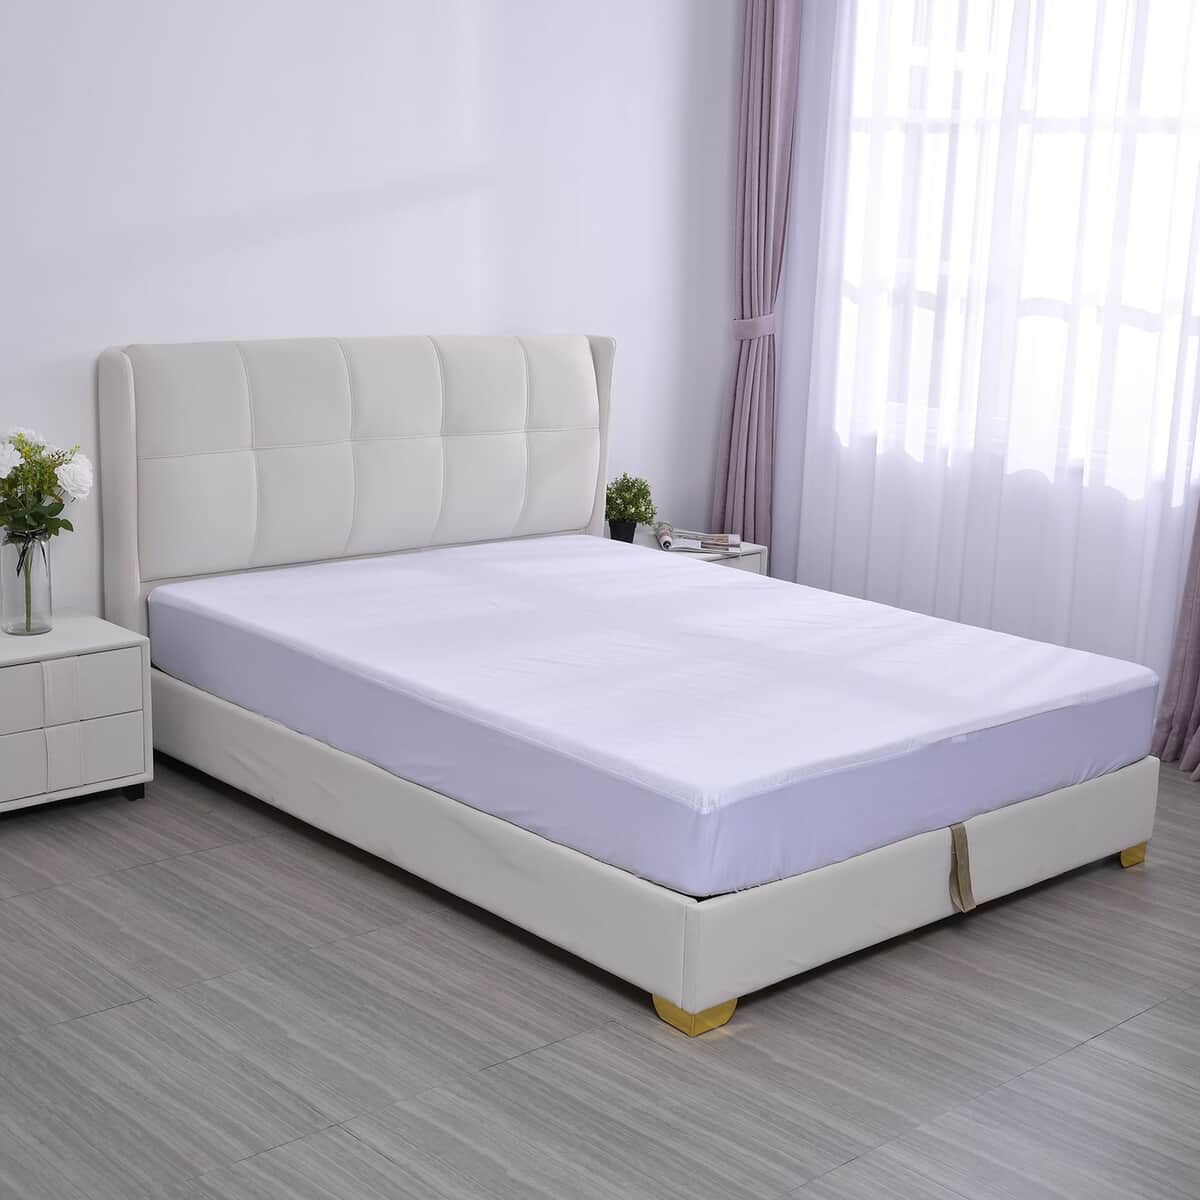 Homesmart White Polyester Terry Waterproof Mattress Protector image number 0